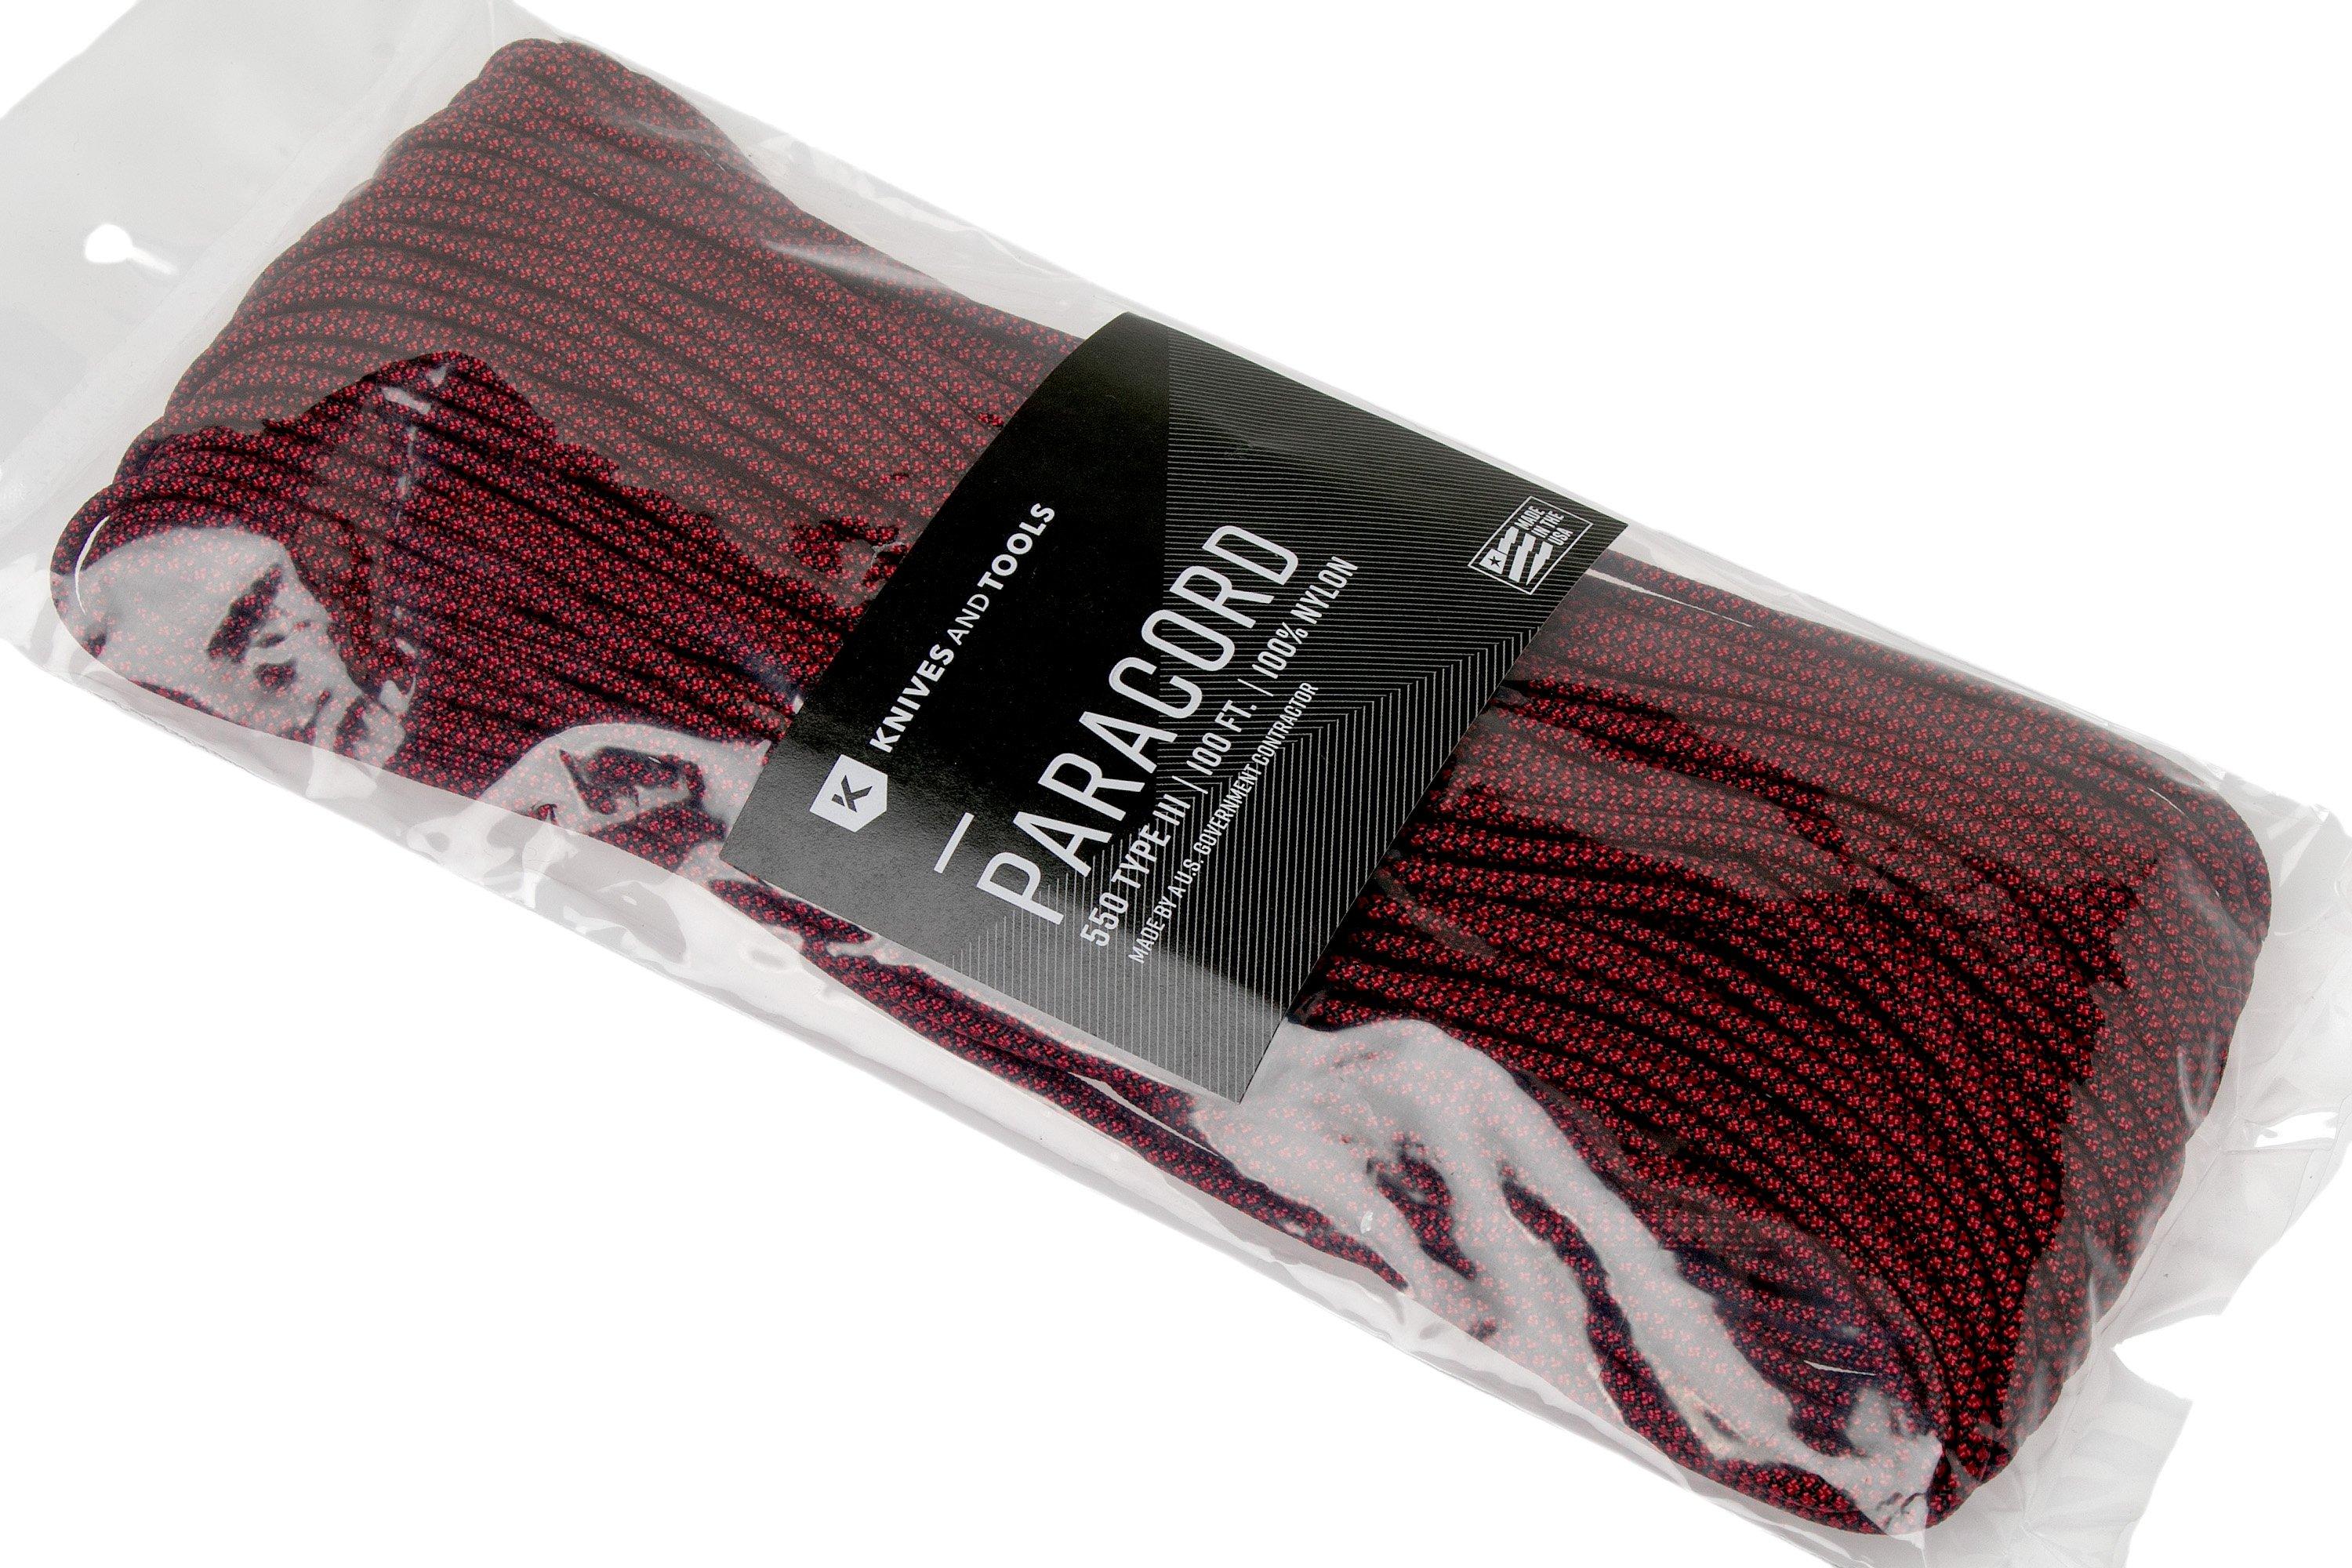 Knivesandtools 550 paracord type III, colour: imperial red diamond, 100 ft  (30.48 m)